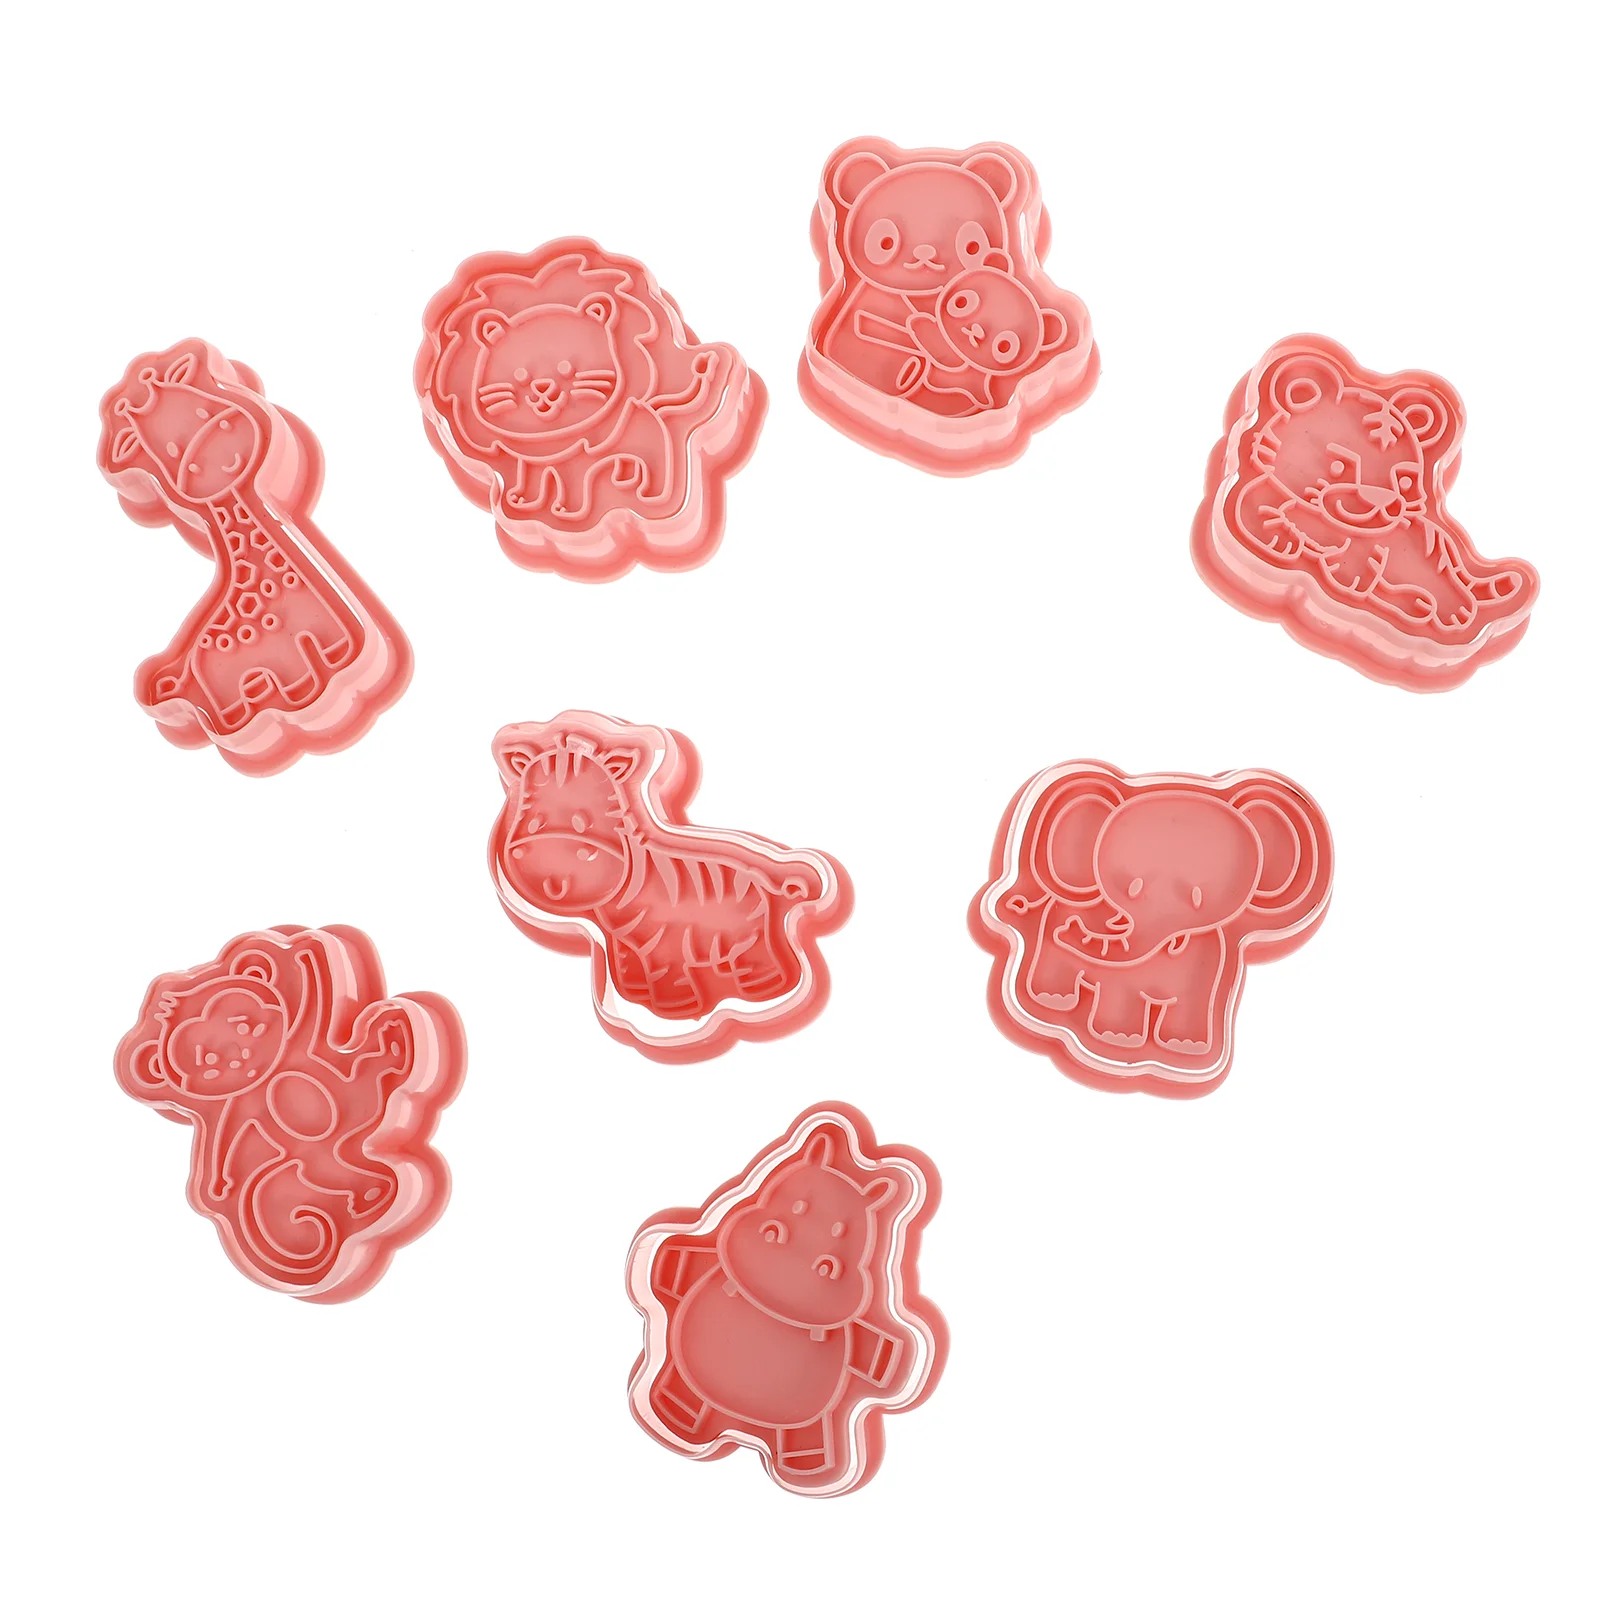 

8 Pcs Animal Cookie Cutters Baking Molds DIY Tool Capacillos Para Cupcake Tools Shaped Pp Biscuit Pressing Stencils